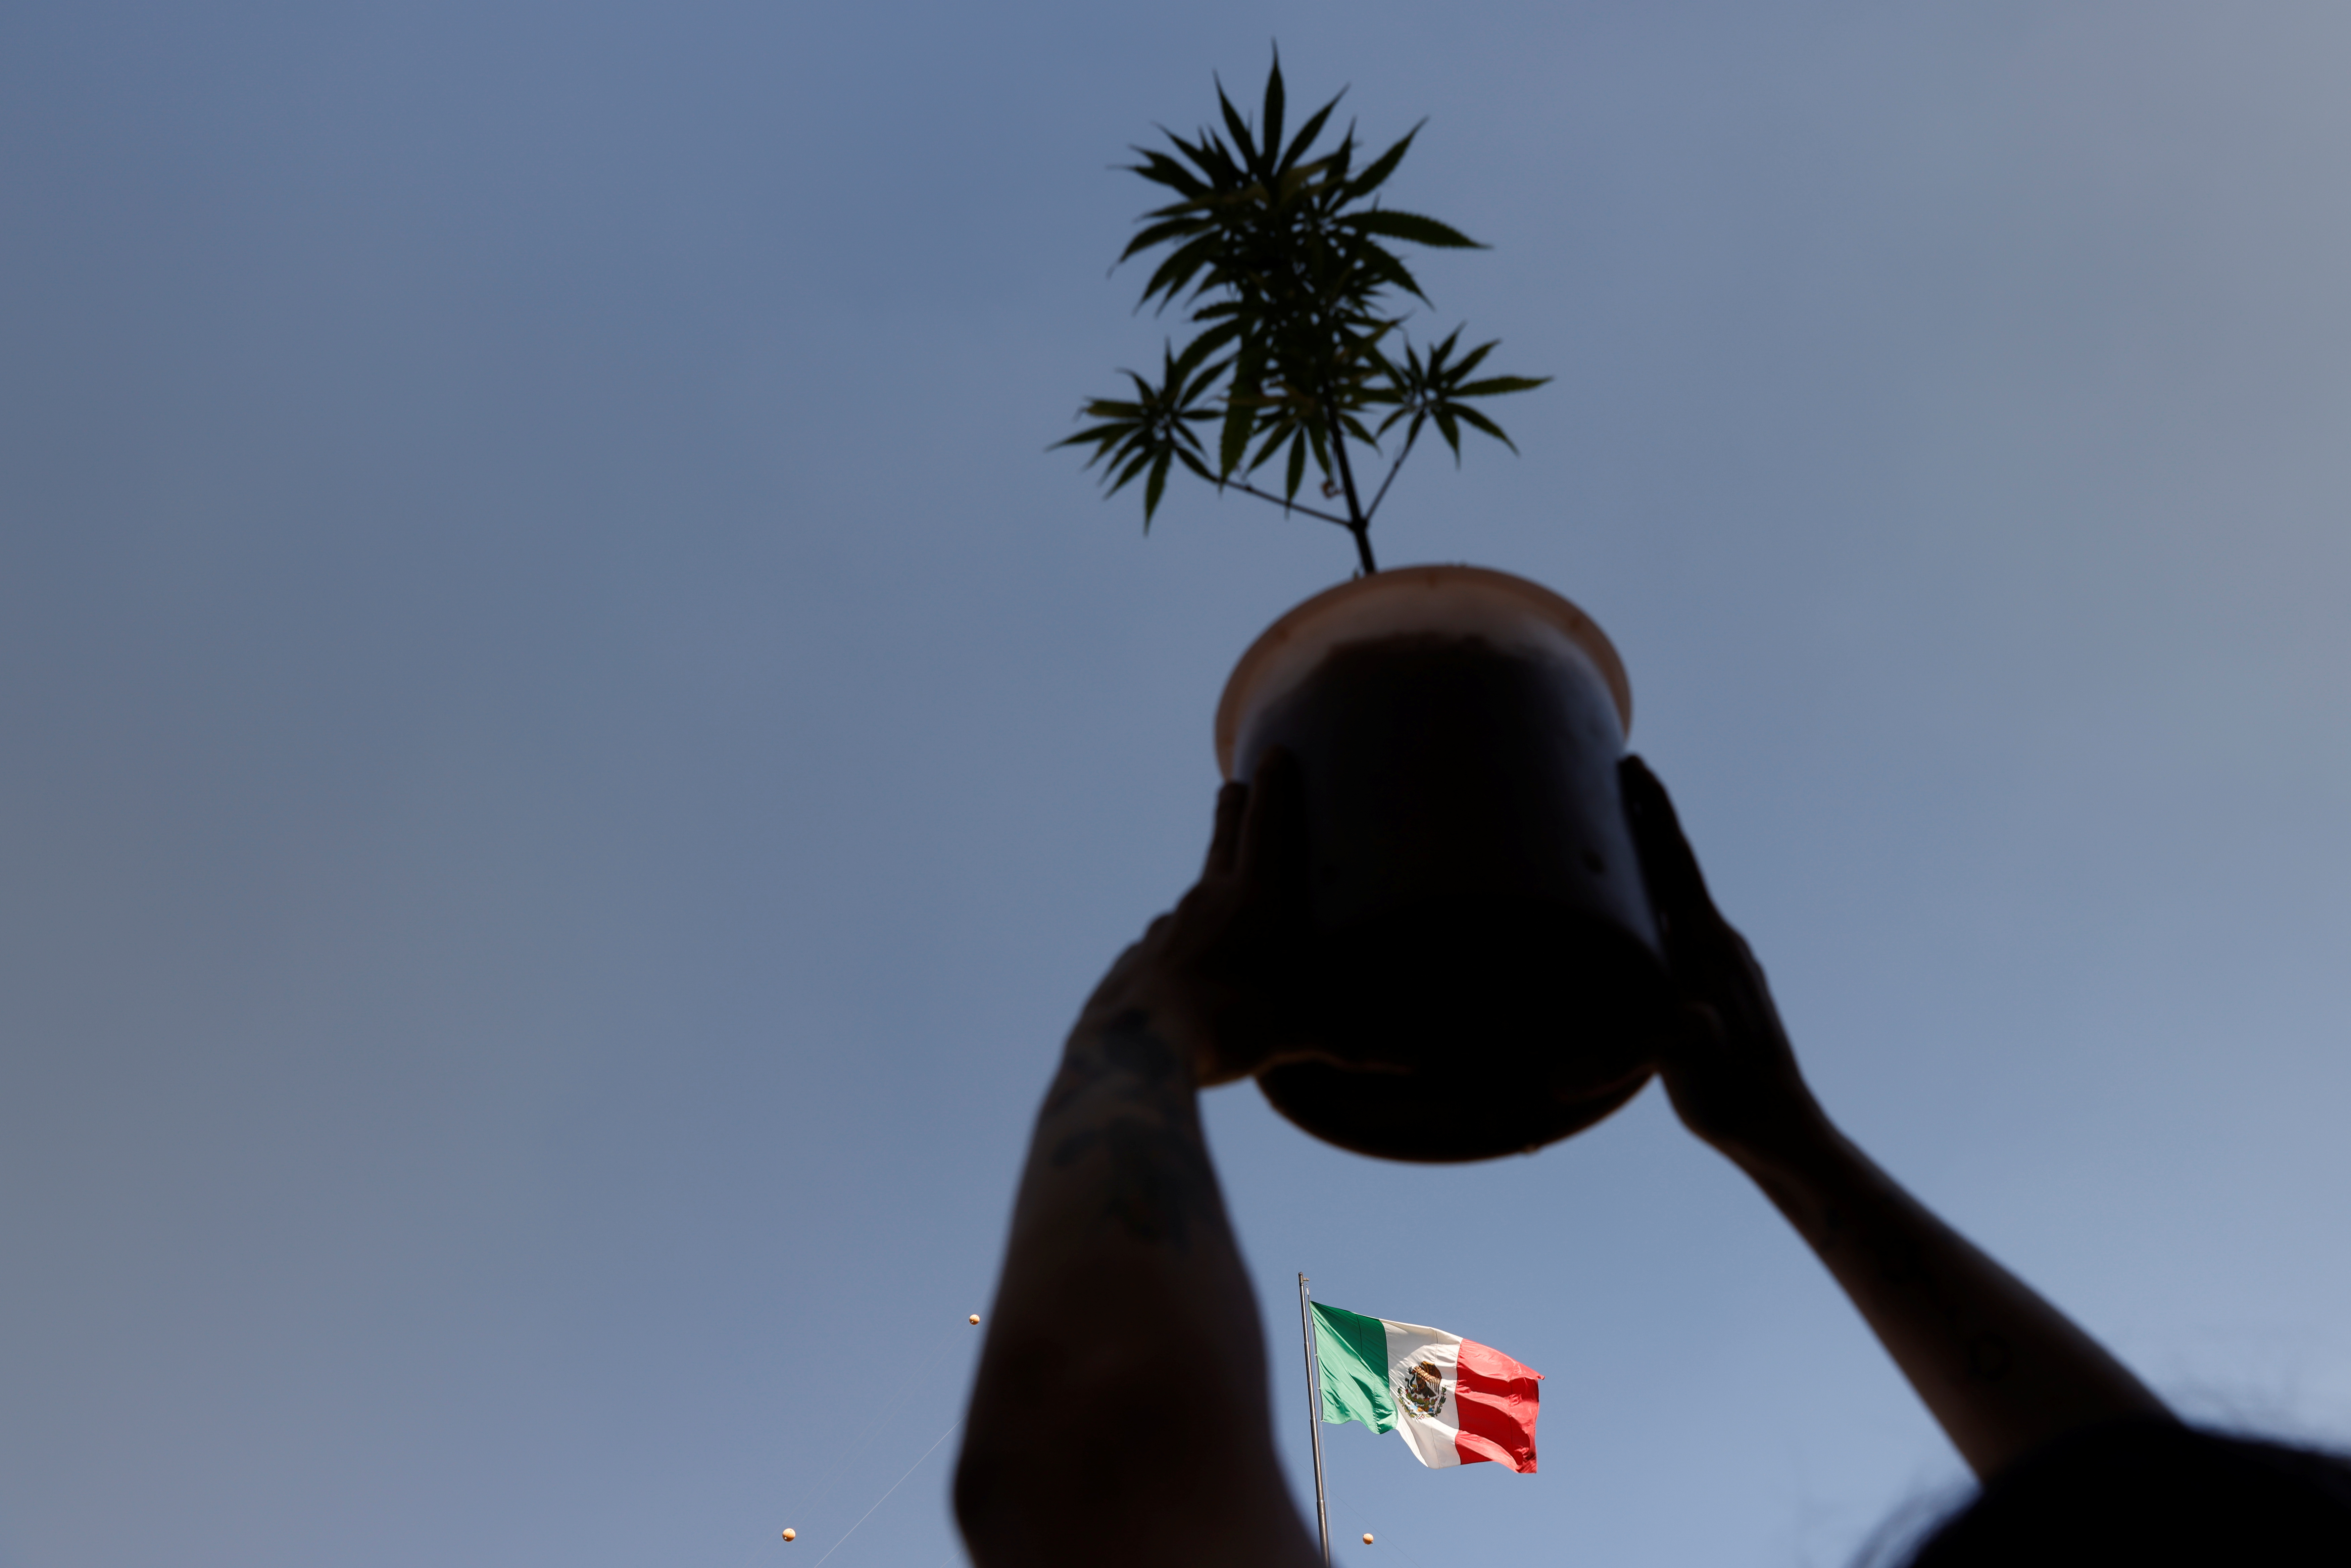 An activist in favor of legalized marijuana holds a marijuana plant during a march as they wait for Congress for passage of a bill that would legalize it, in Mexico City